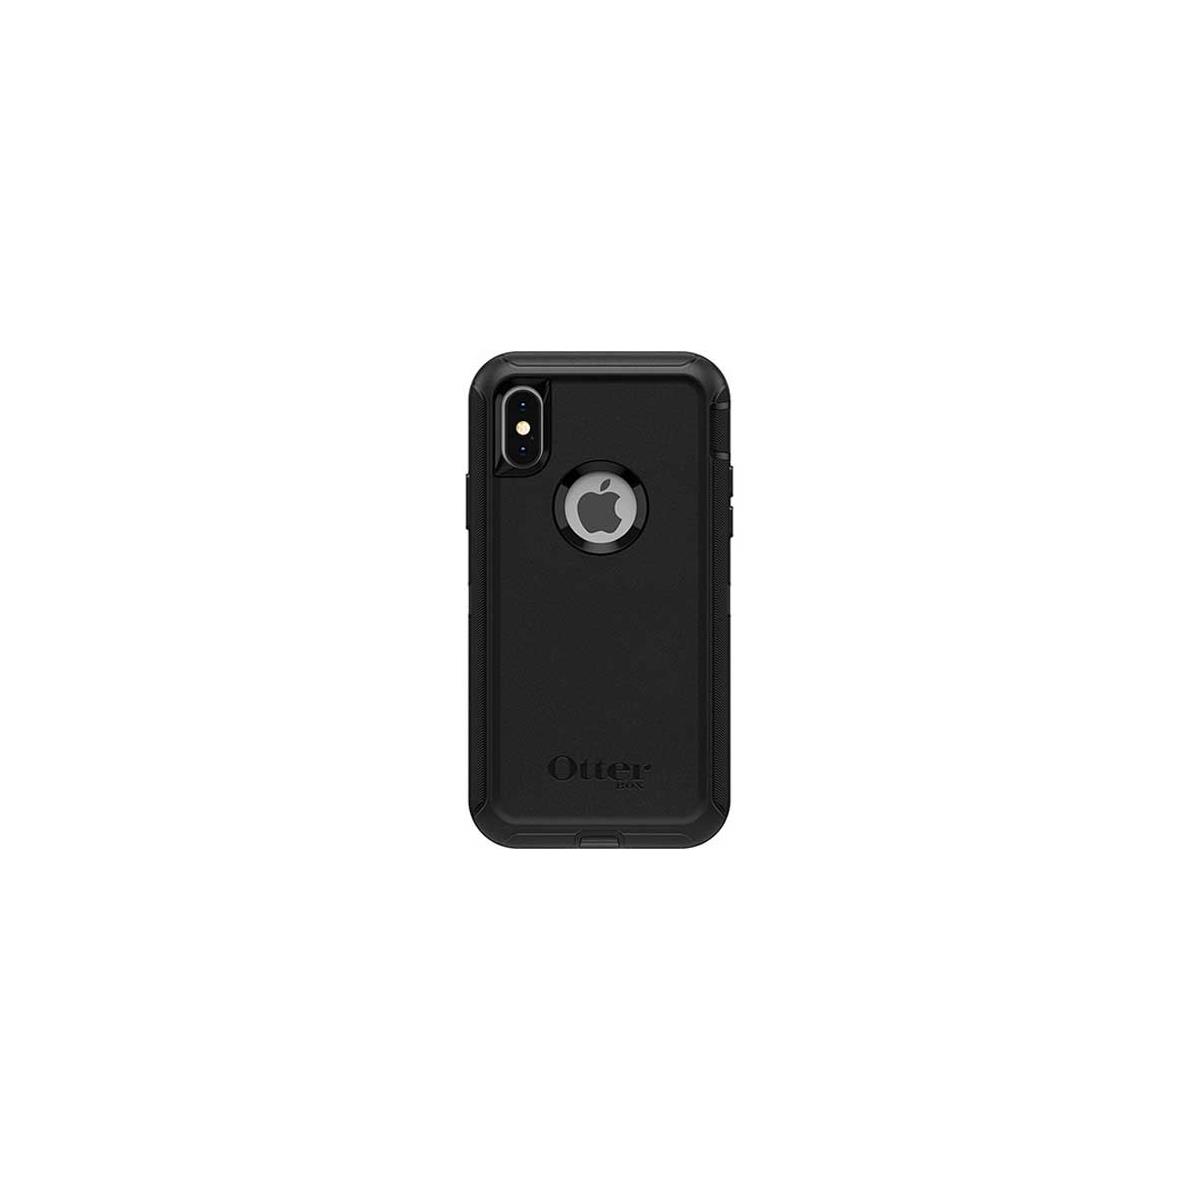 Photos - Case OtterBox Defender  for iPhone X/Xs - Black 77-59464 